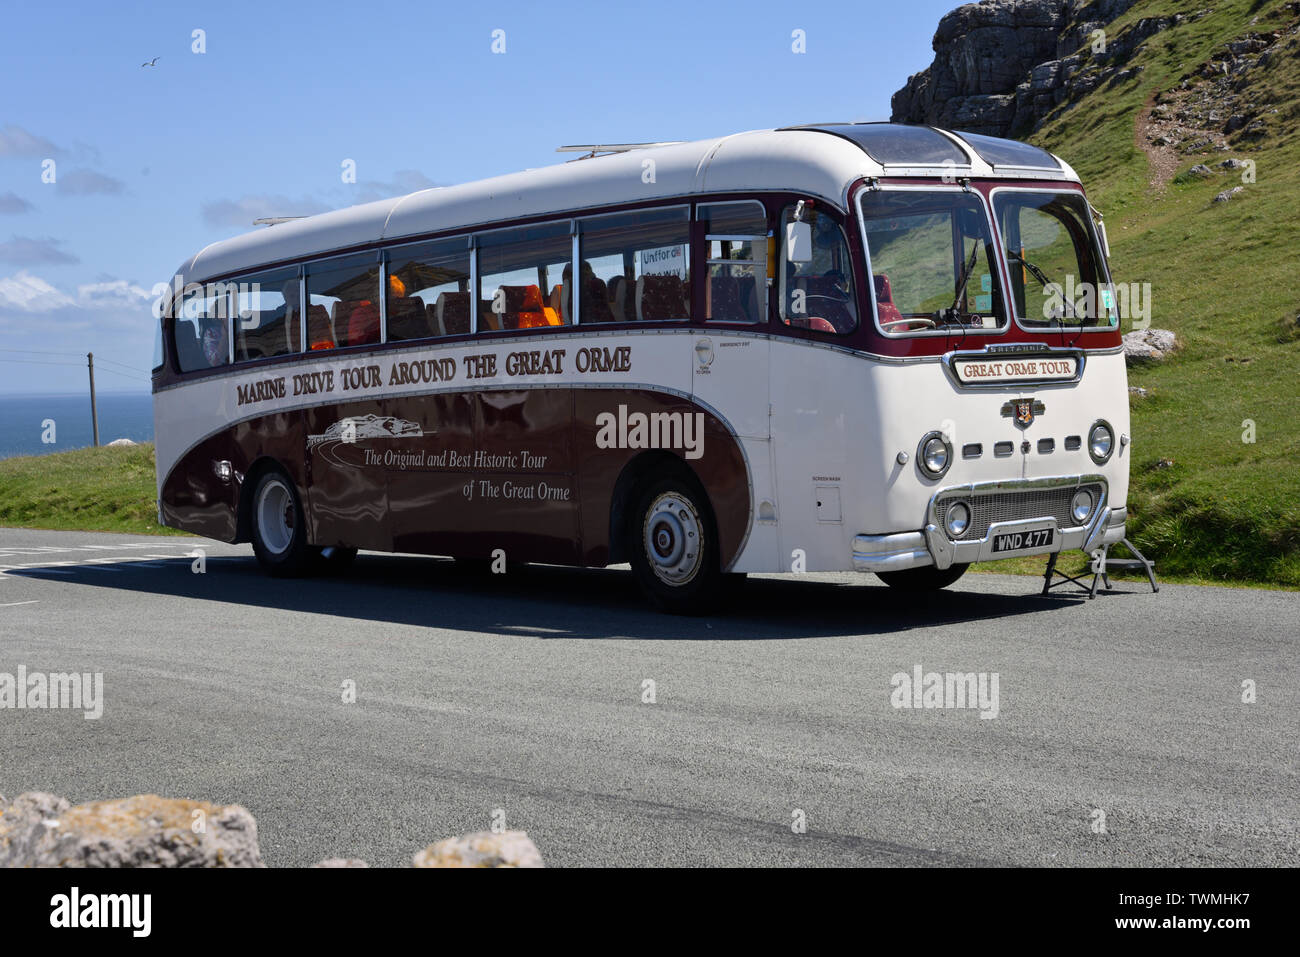 Great Orme and all it's tour bus at the top of the great orme cliff views. Stock Photo